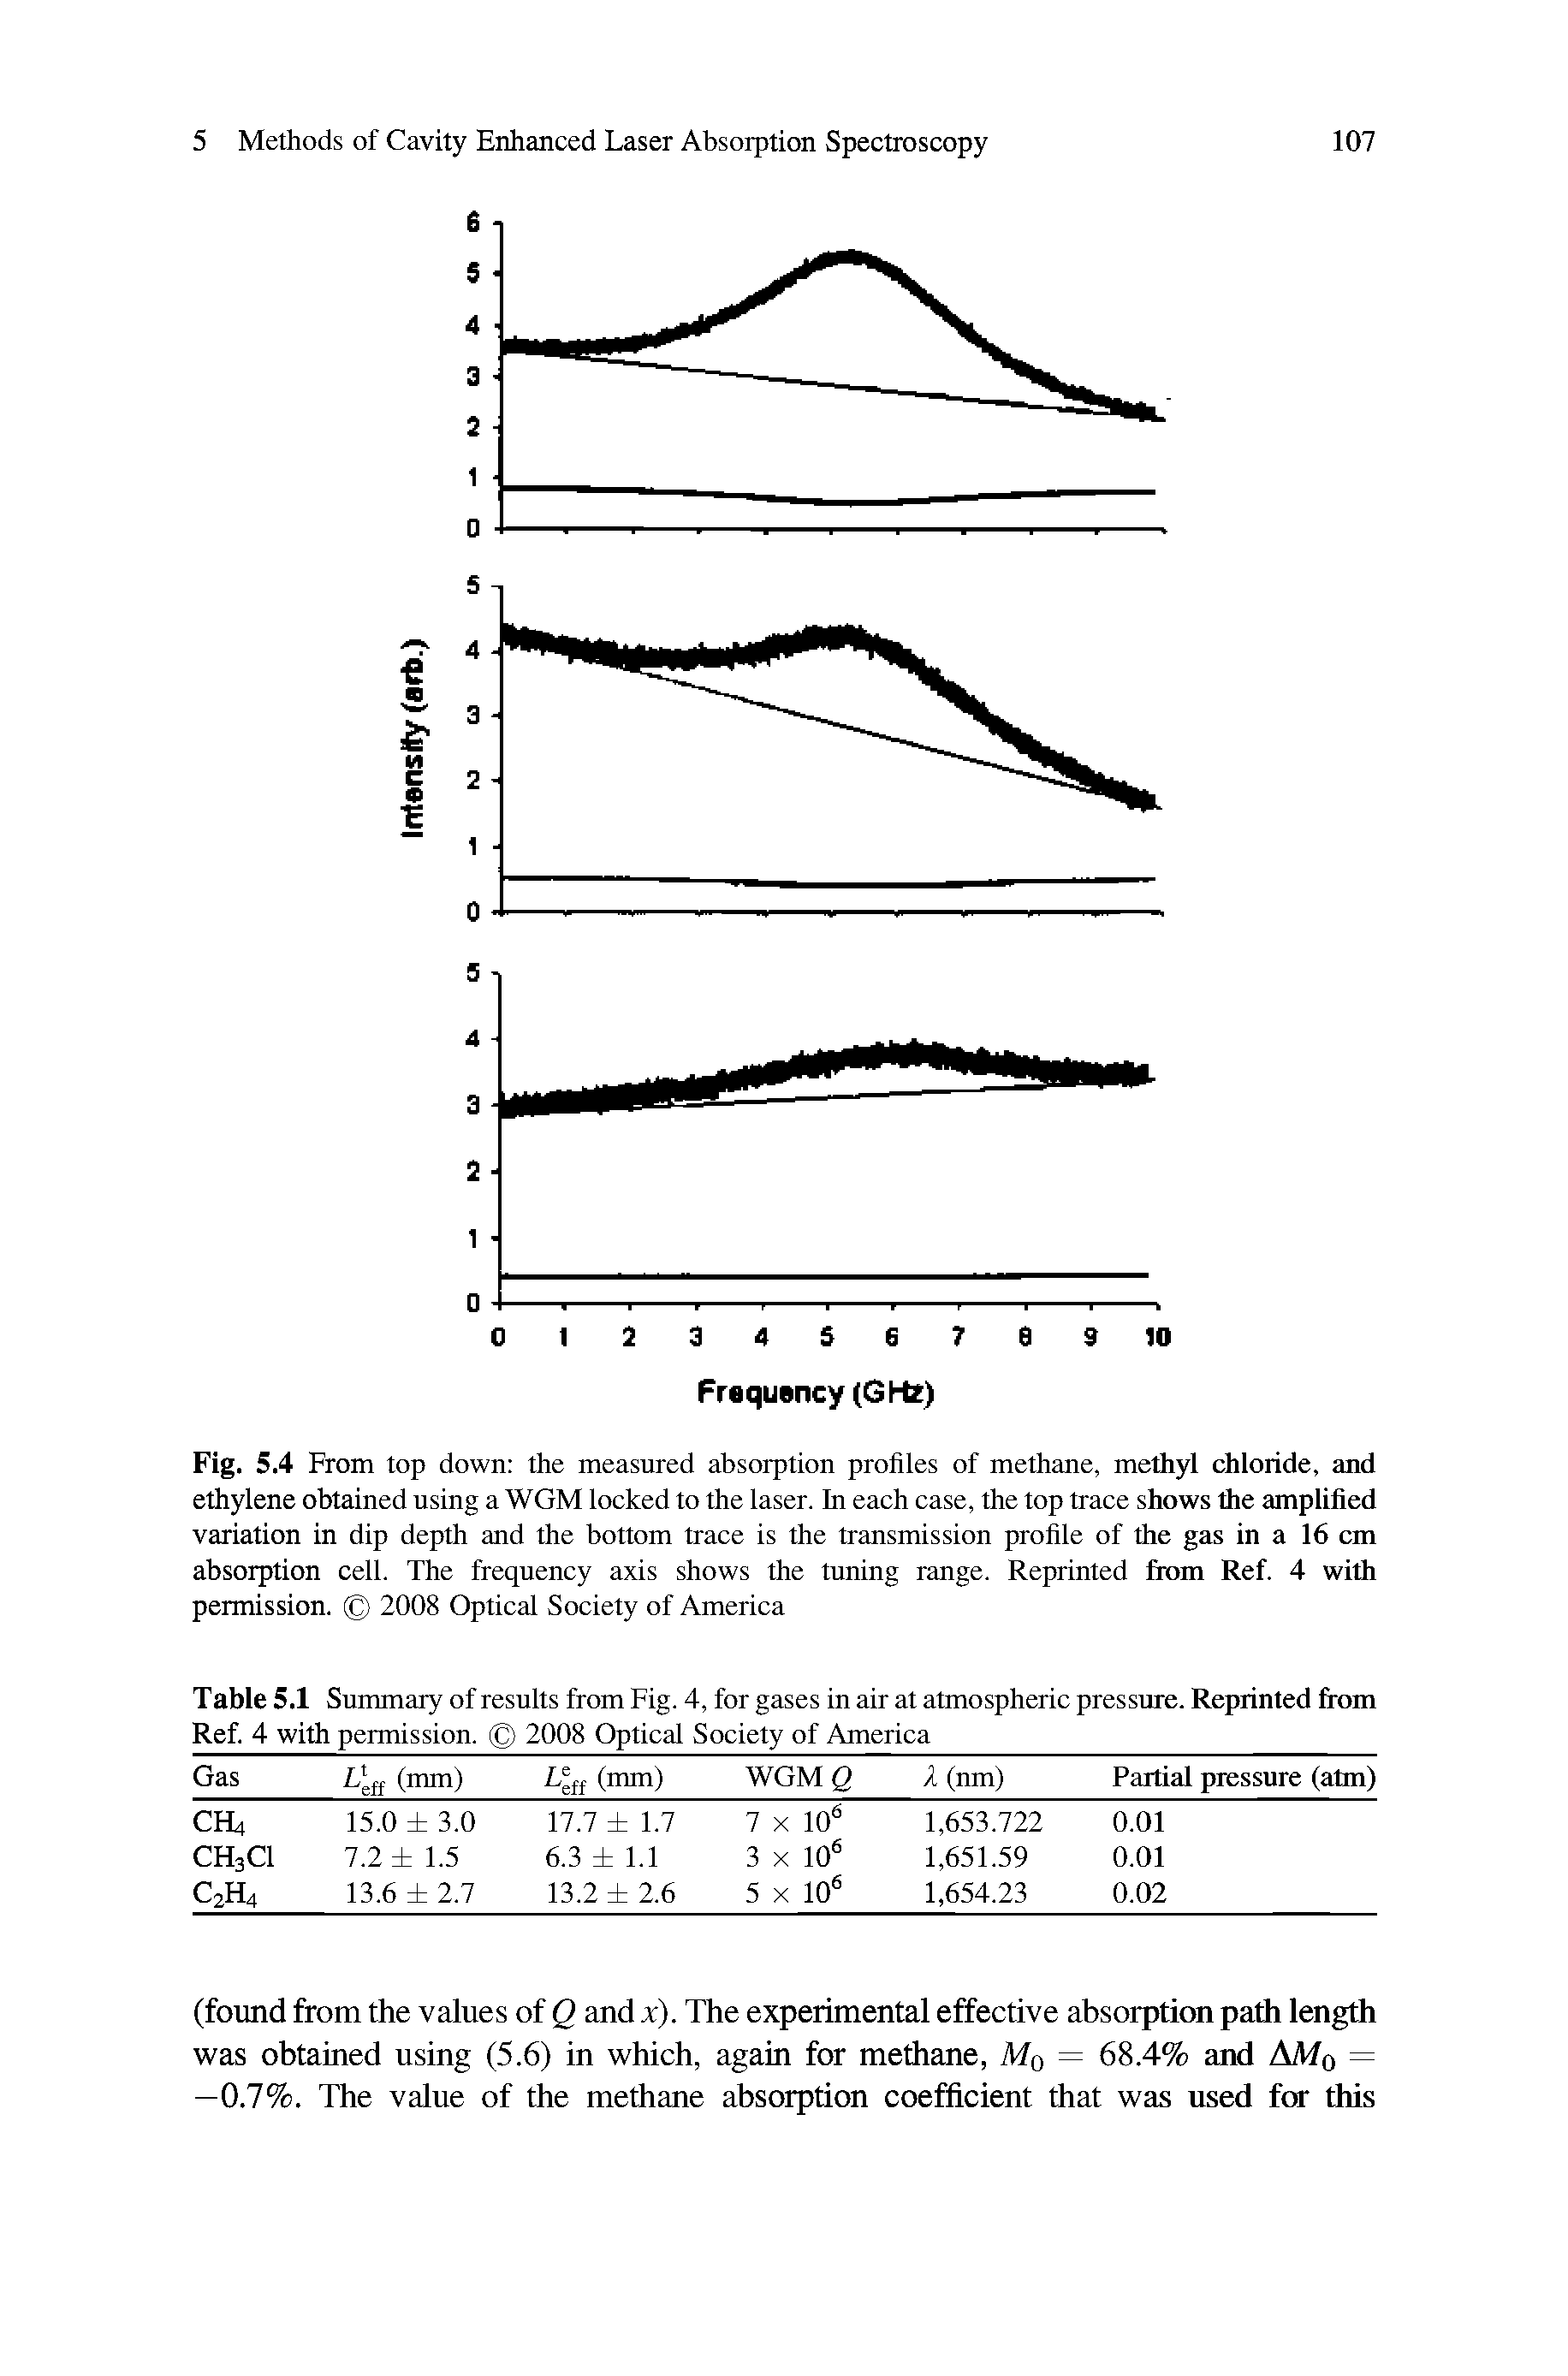 Table 5.1 Summary of results from Fig. 4, for gases in air at atmospheric pressure. Reprinted from Ref. 4 with permission. 2008 Optical Society of America...